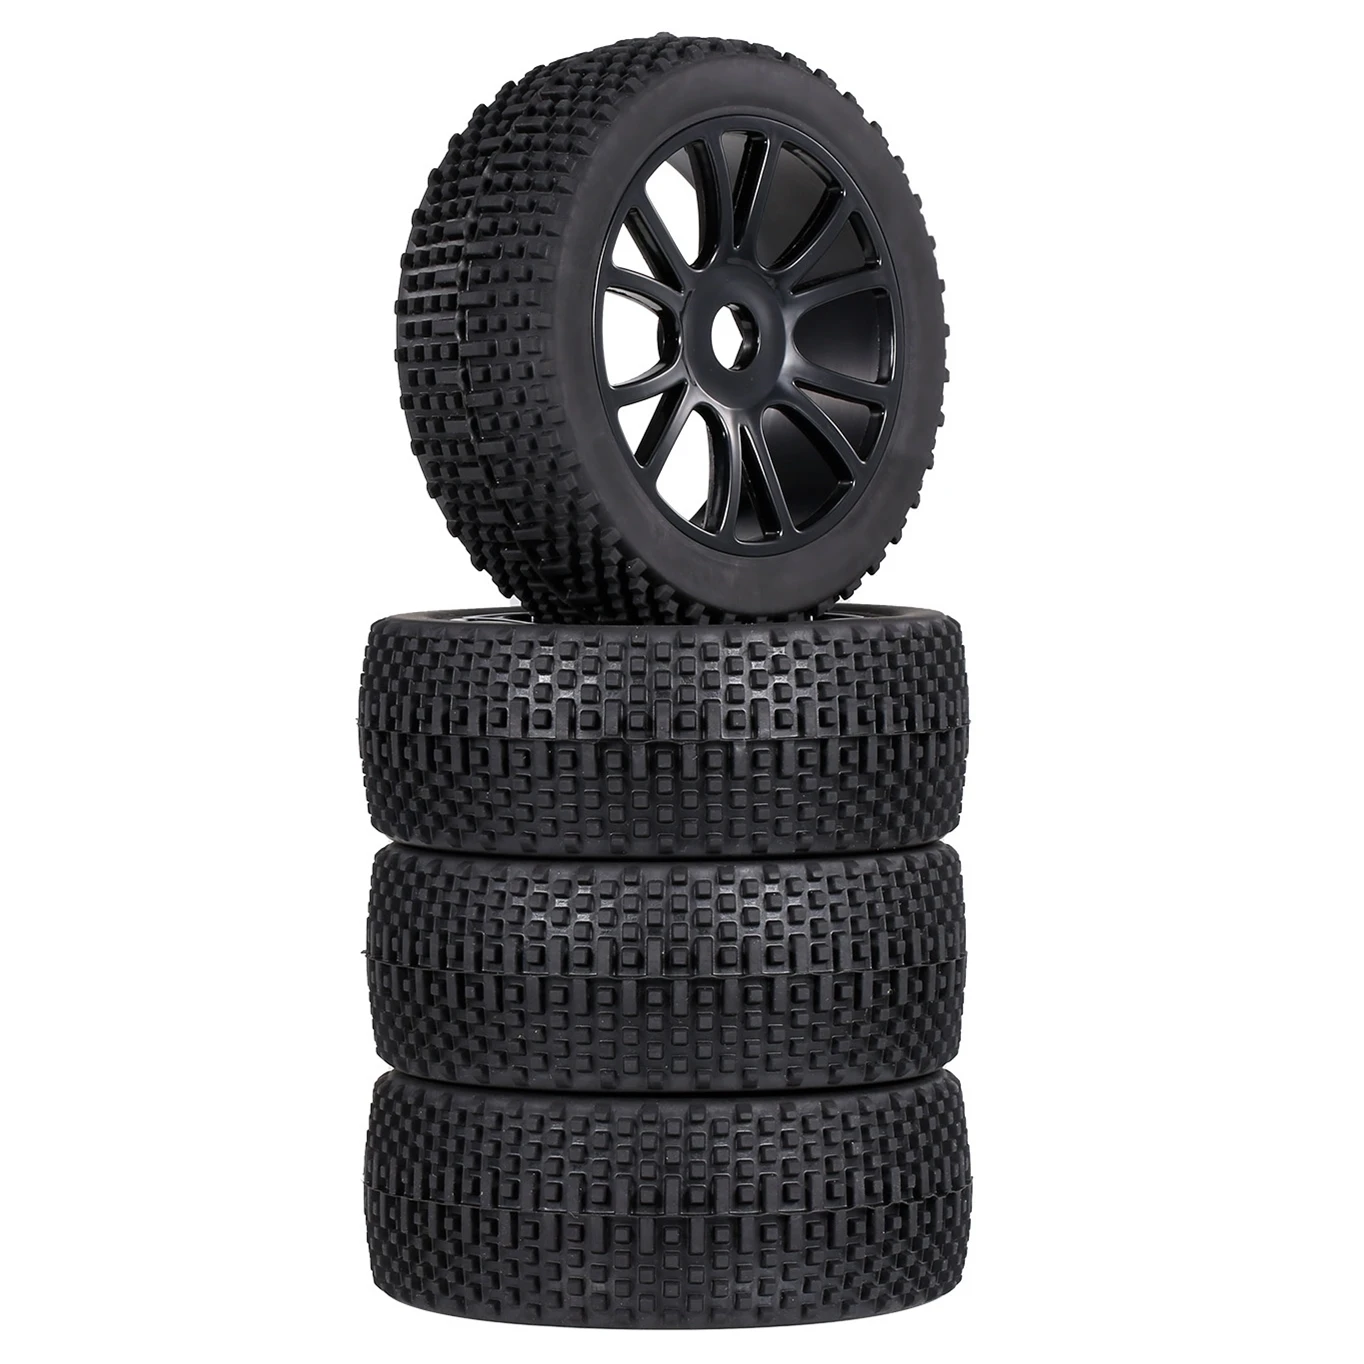 

110mm 1/8 Scale RC Off-Road Buggy Tires Wheel 17mm Hex for ARRMA Redcat Team Losi Kyosho VRX HPI WR8 HSP Hobao